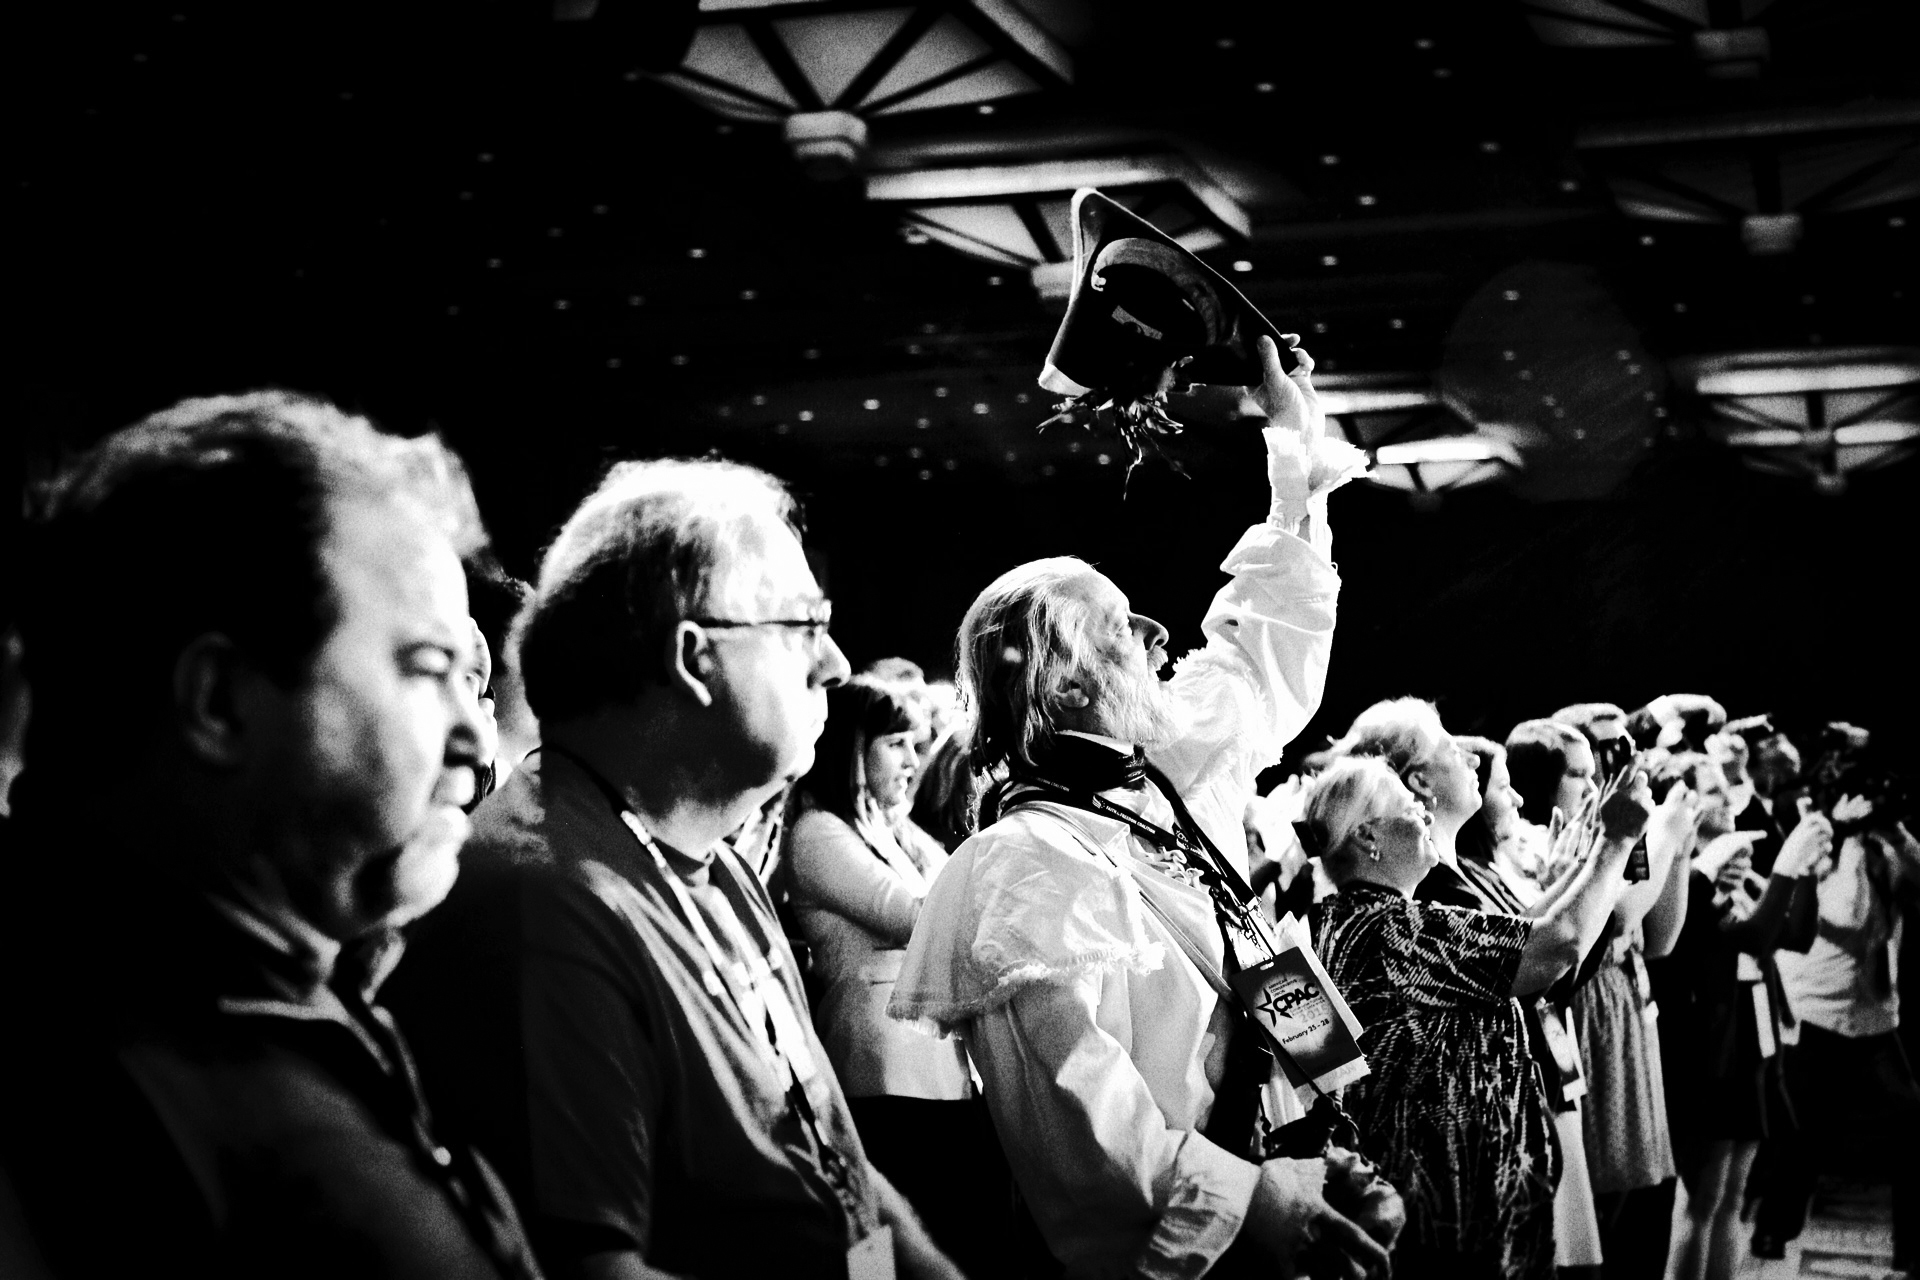 Attendees applaud at CPAC in National Harbor, Md. on Feb. 27, 2015.